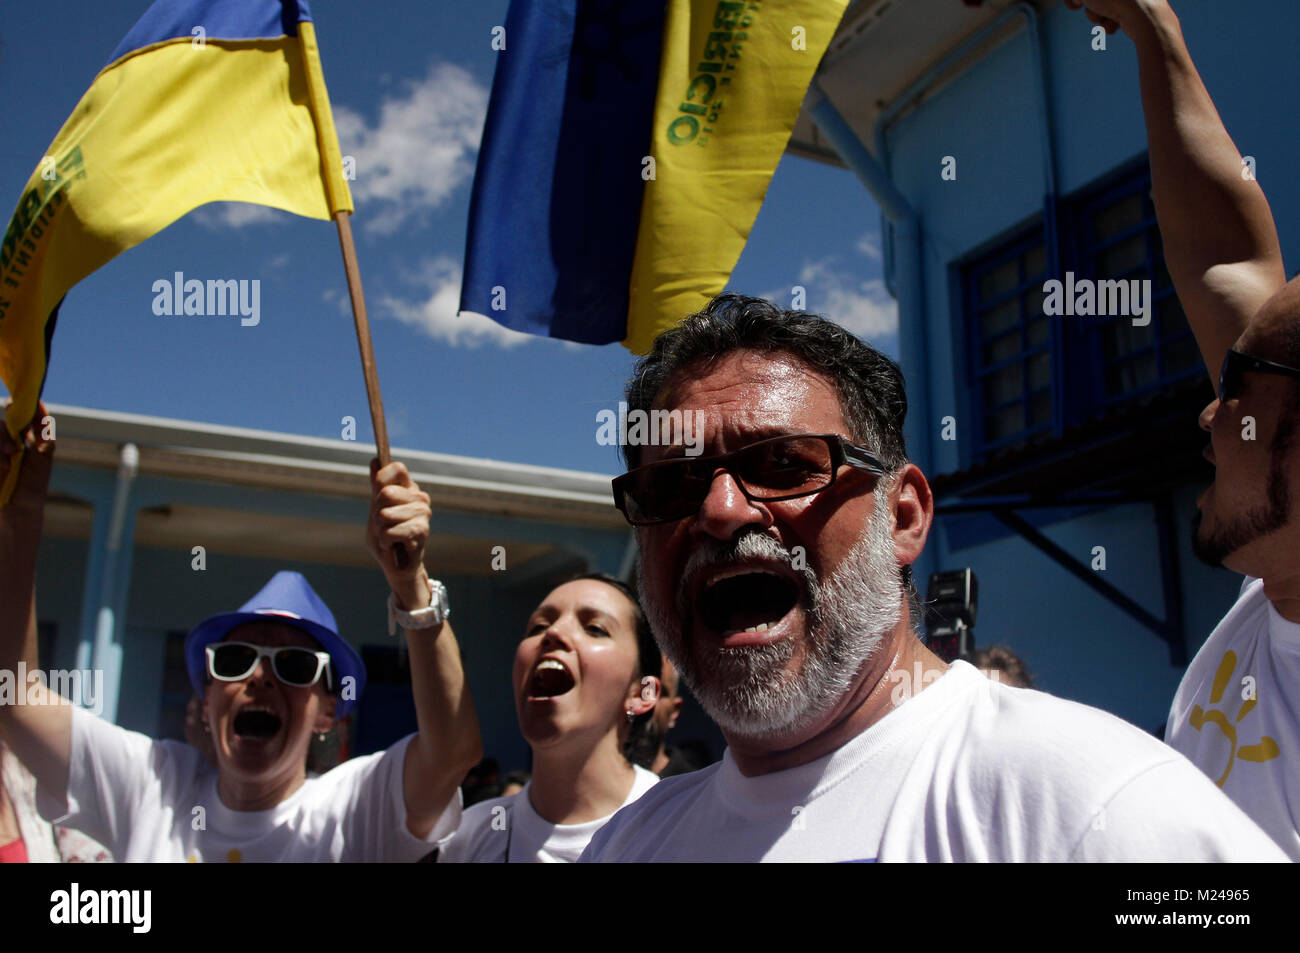 San Jose, Costa Rica. 4th Feb, 2018. Supporters of the Costa Rica's President candidate Fabricio Alvarado of the National Restoration react during the Presidential elections in San Jose, Costa Rica, on Feb. 4, 2018. Costa Rica's President Luis Guillermo Solis on Sunday urged eligible voters to go to the polls to 'express the opinion of the citizenry' in the general elections. Credit: Kent Gilbert/Xinhua/Alamy Live News Stock Photo